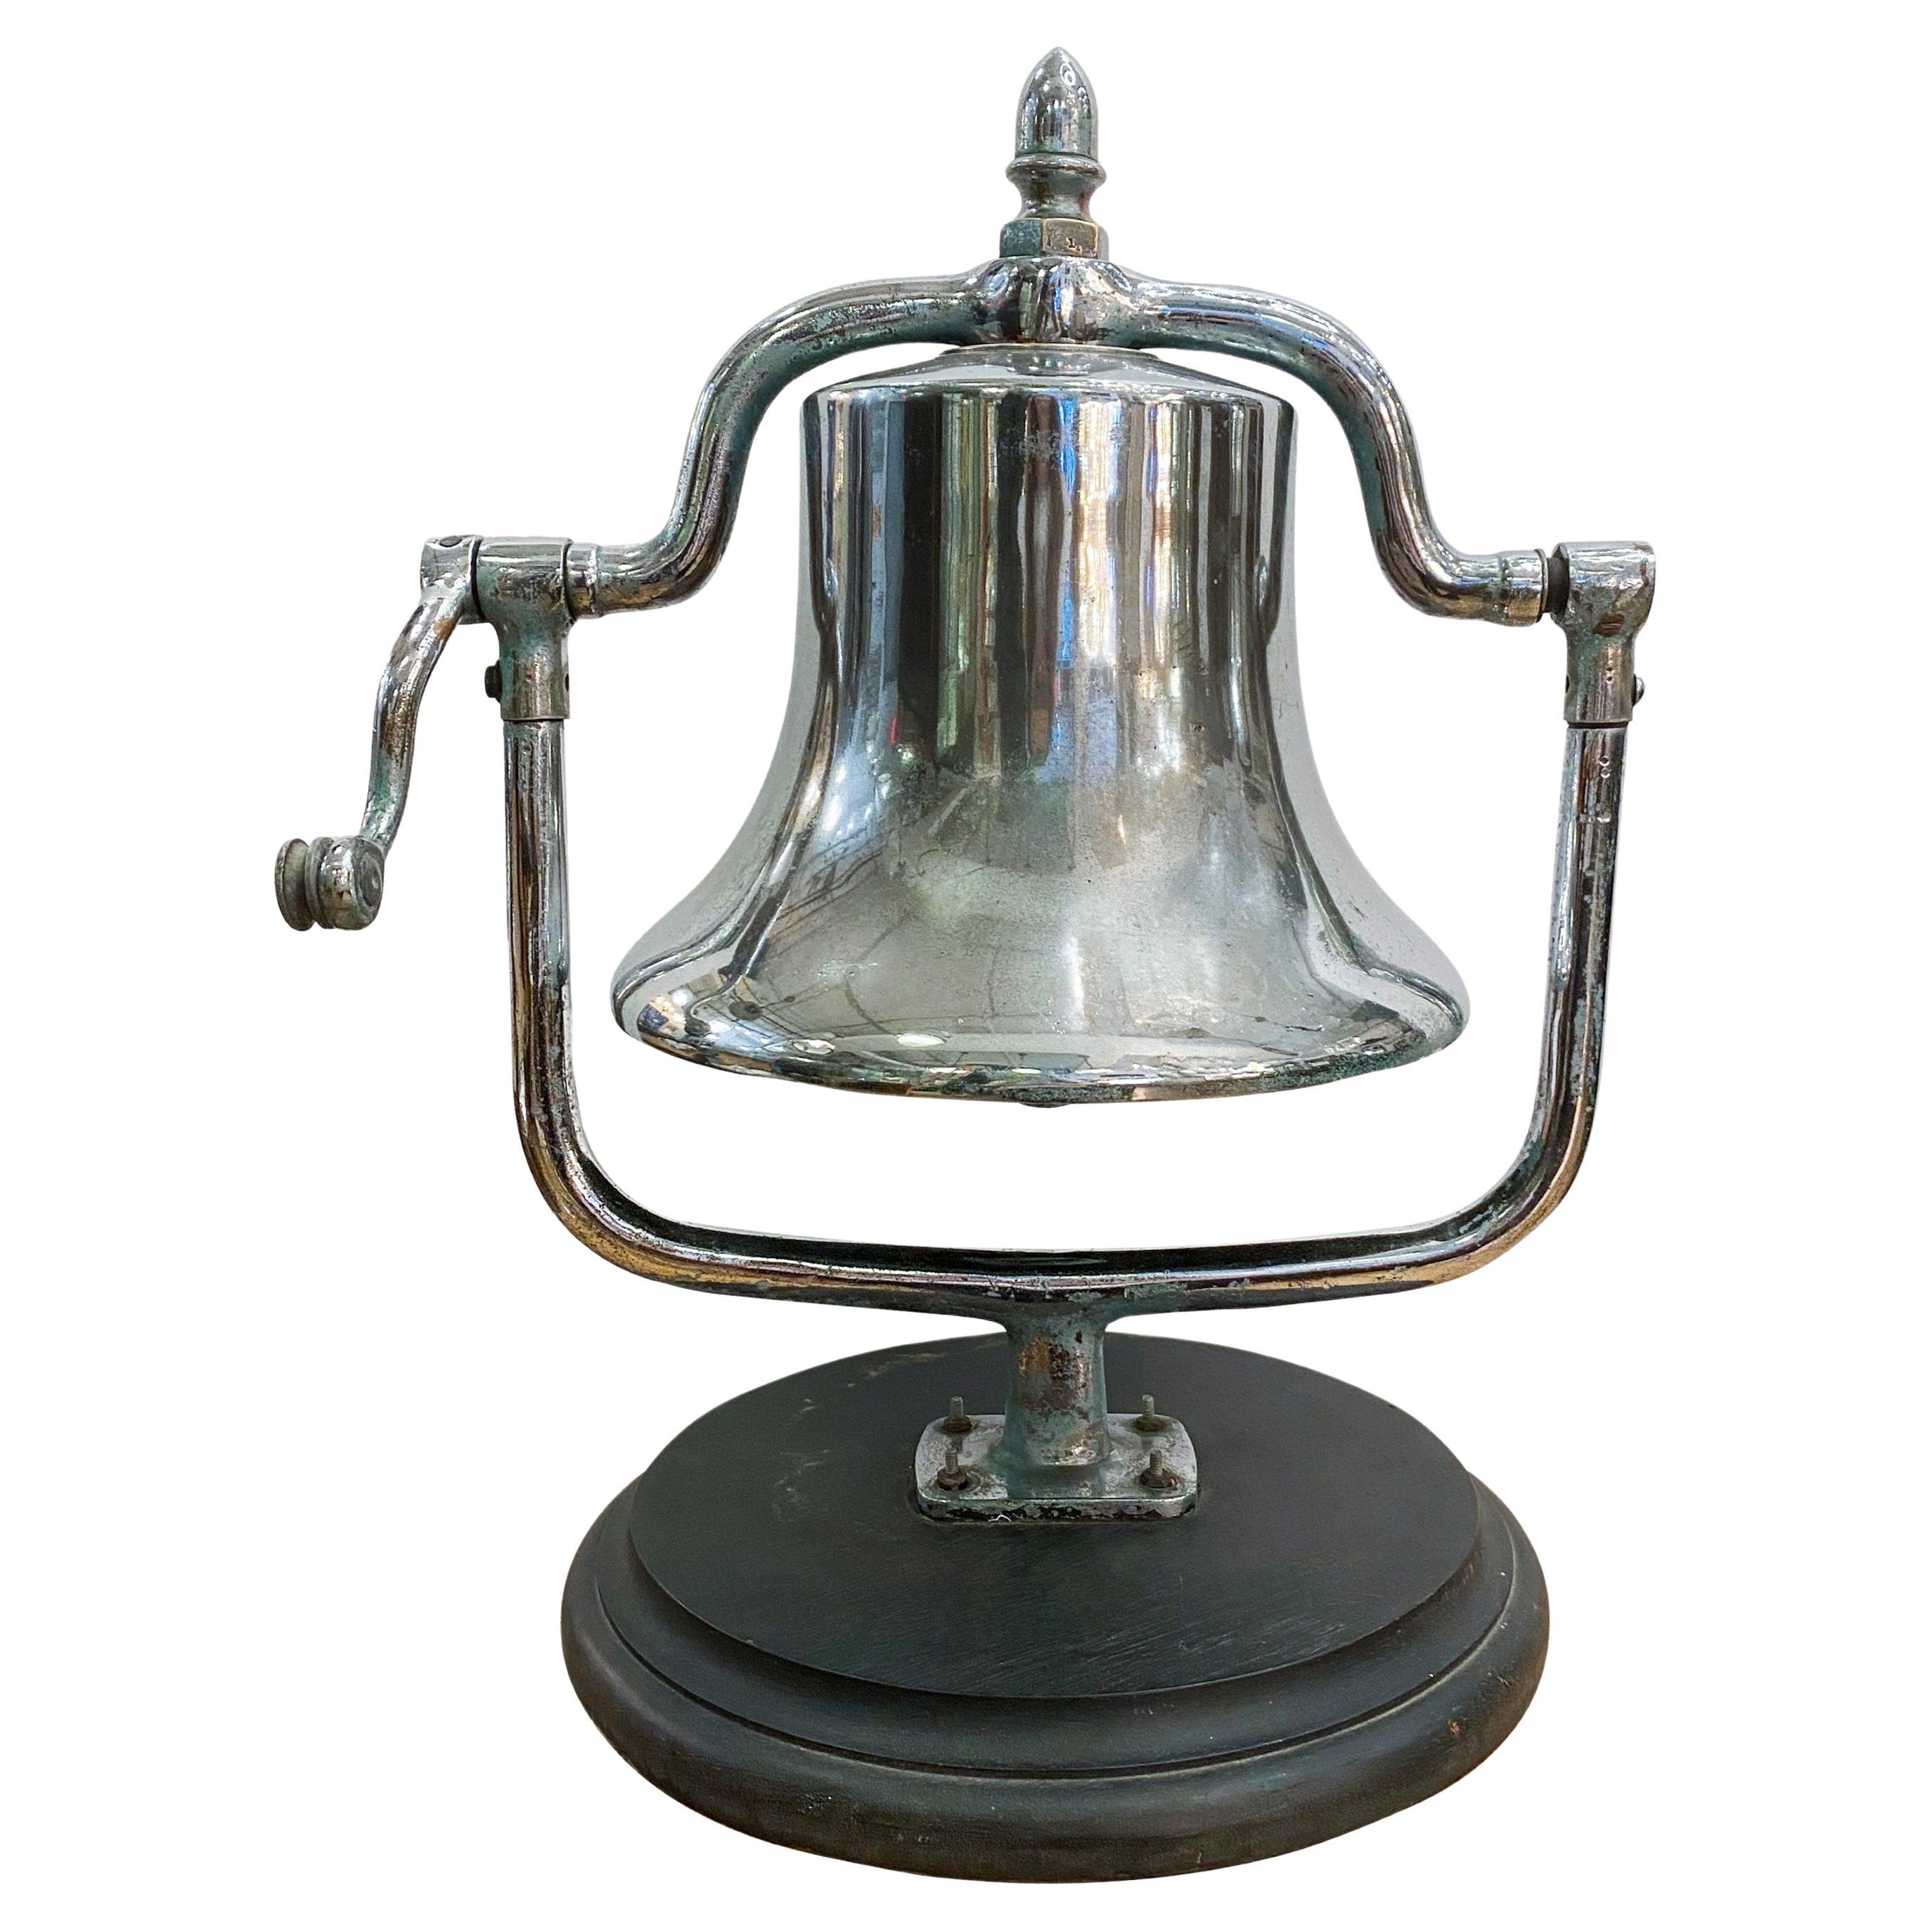 Antique Nickel Plated Bronze Table Top Fire Engine Bell For Sale